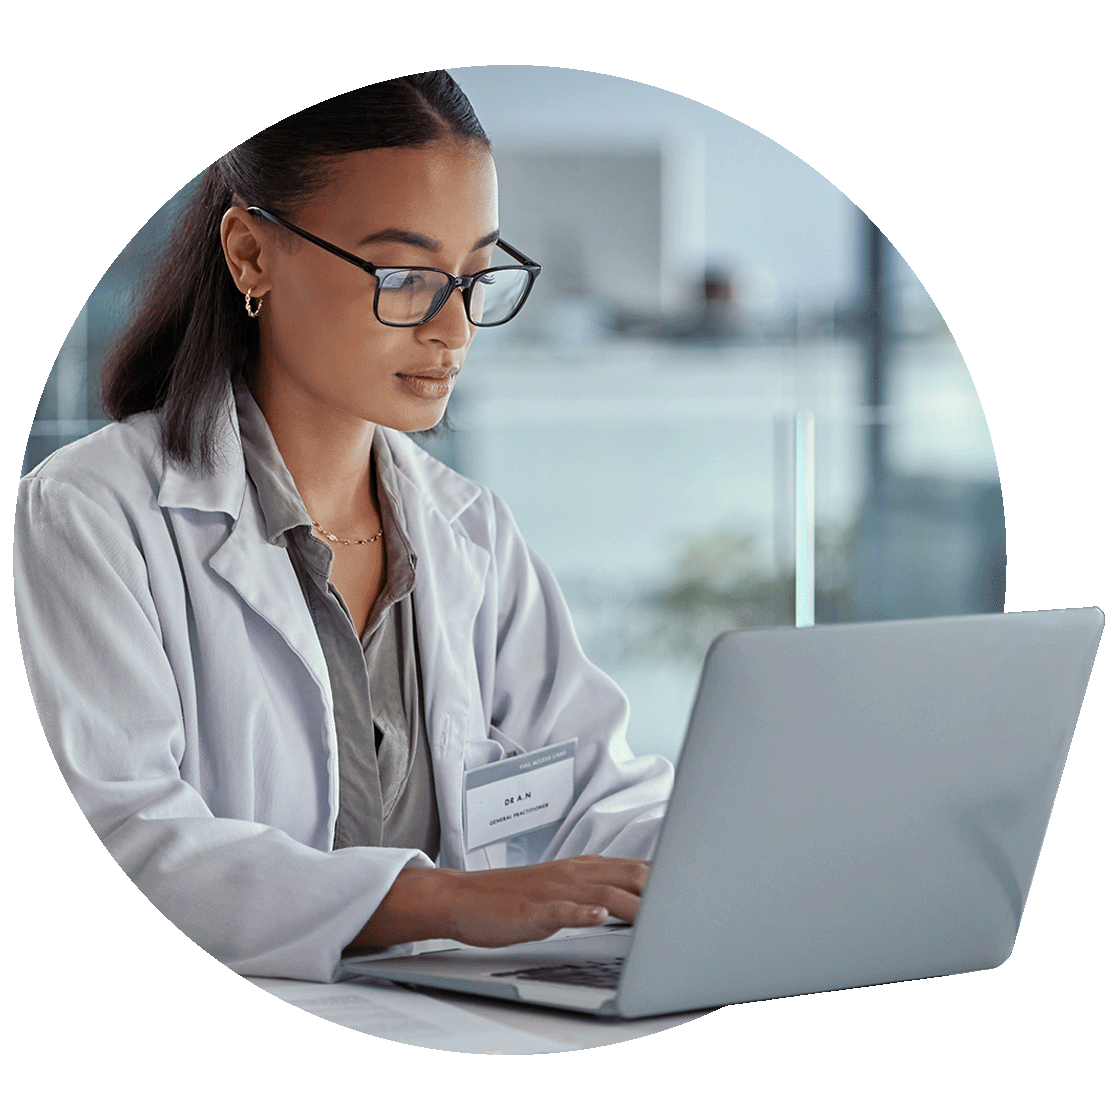 Female doctor in white coat and glasses working on a laptop computer